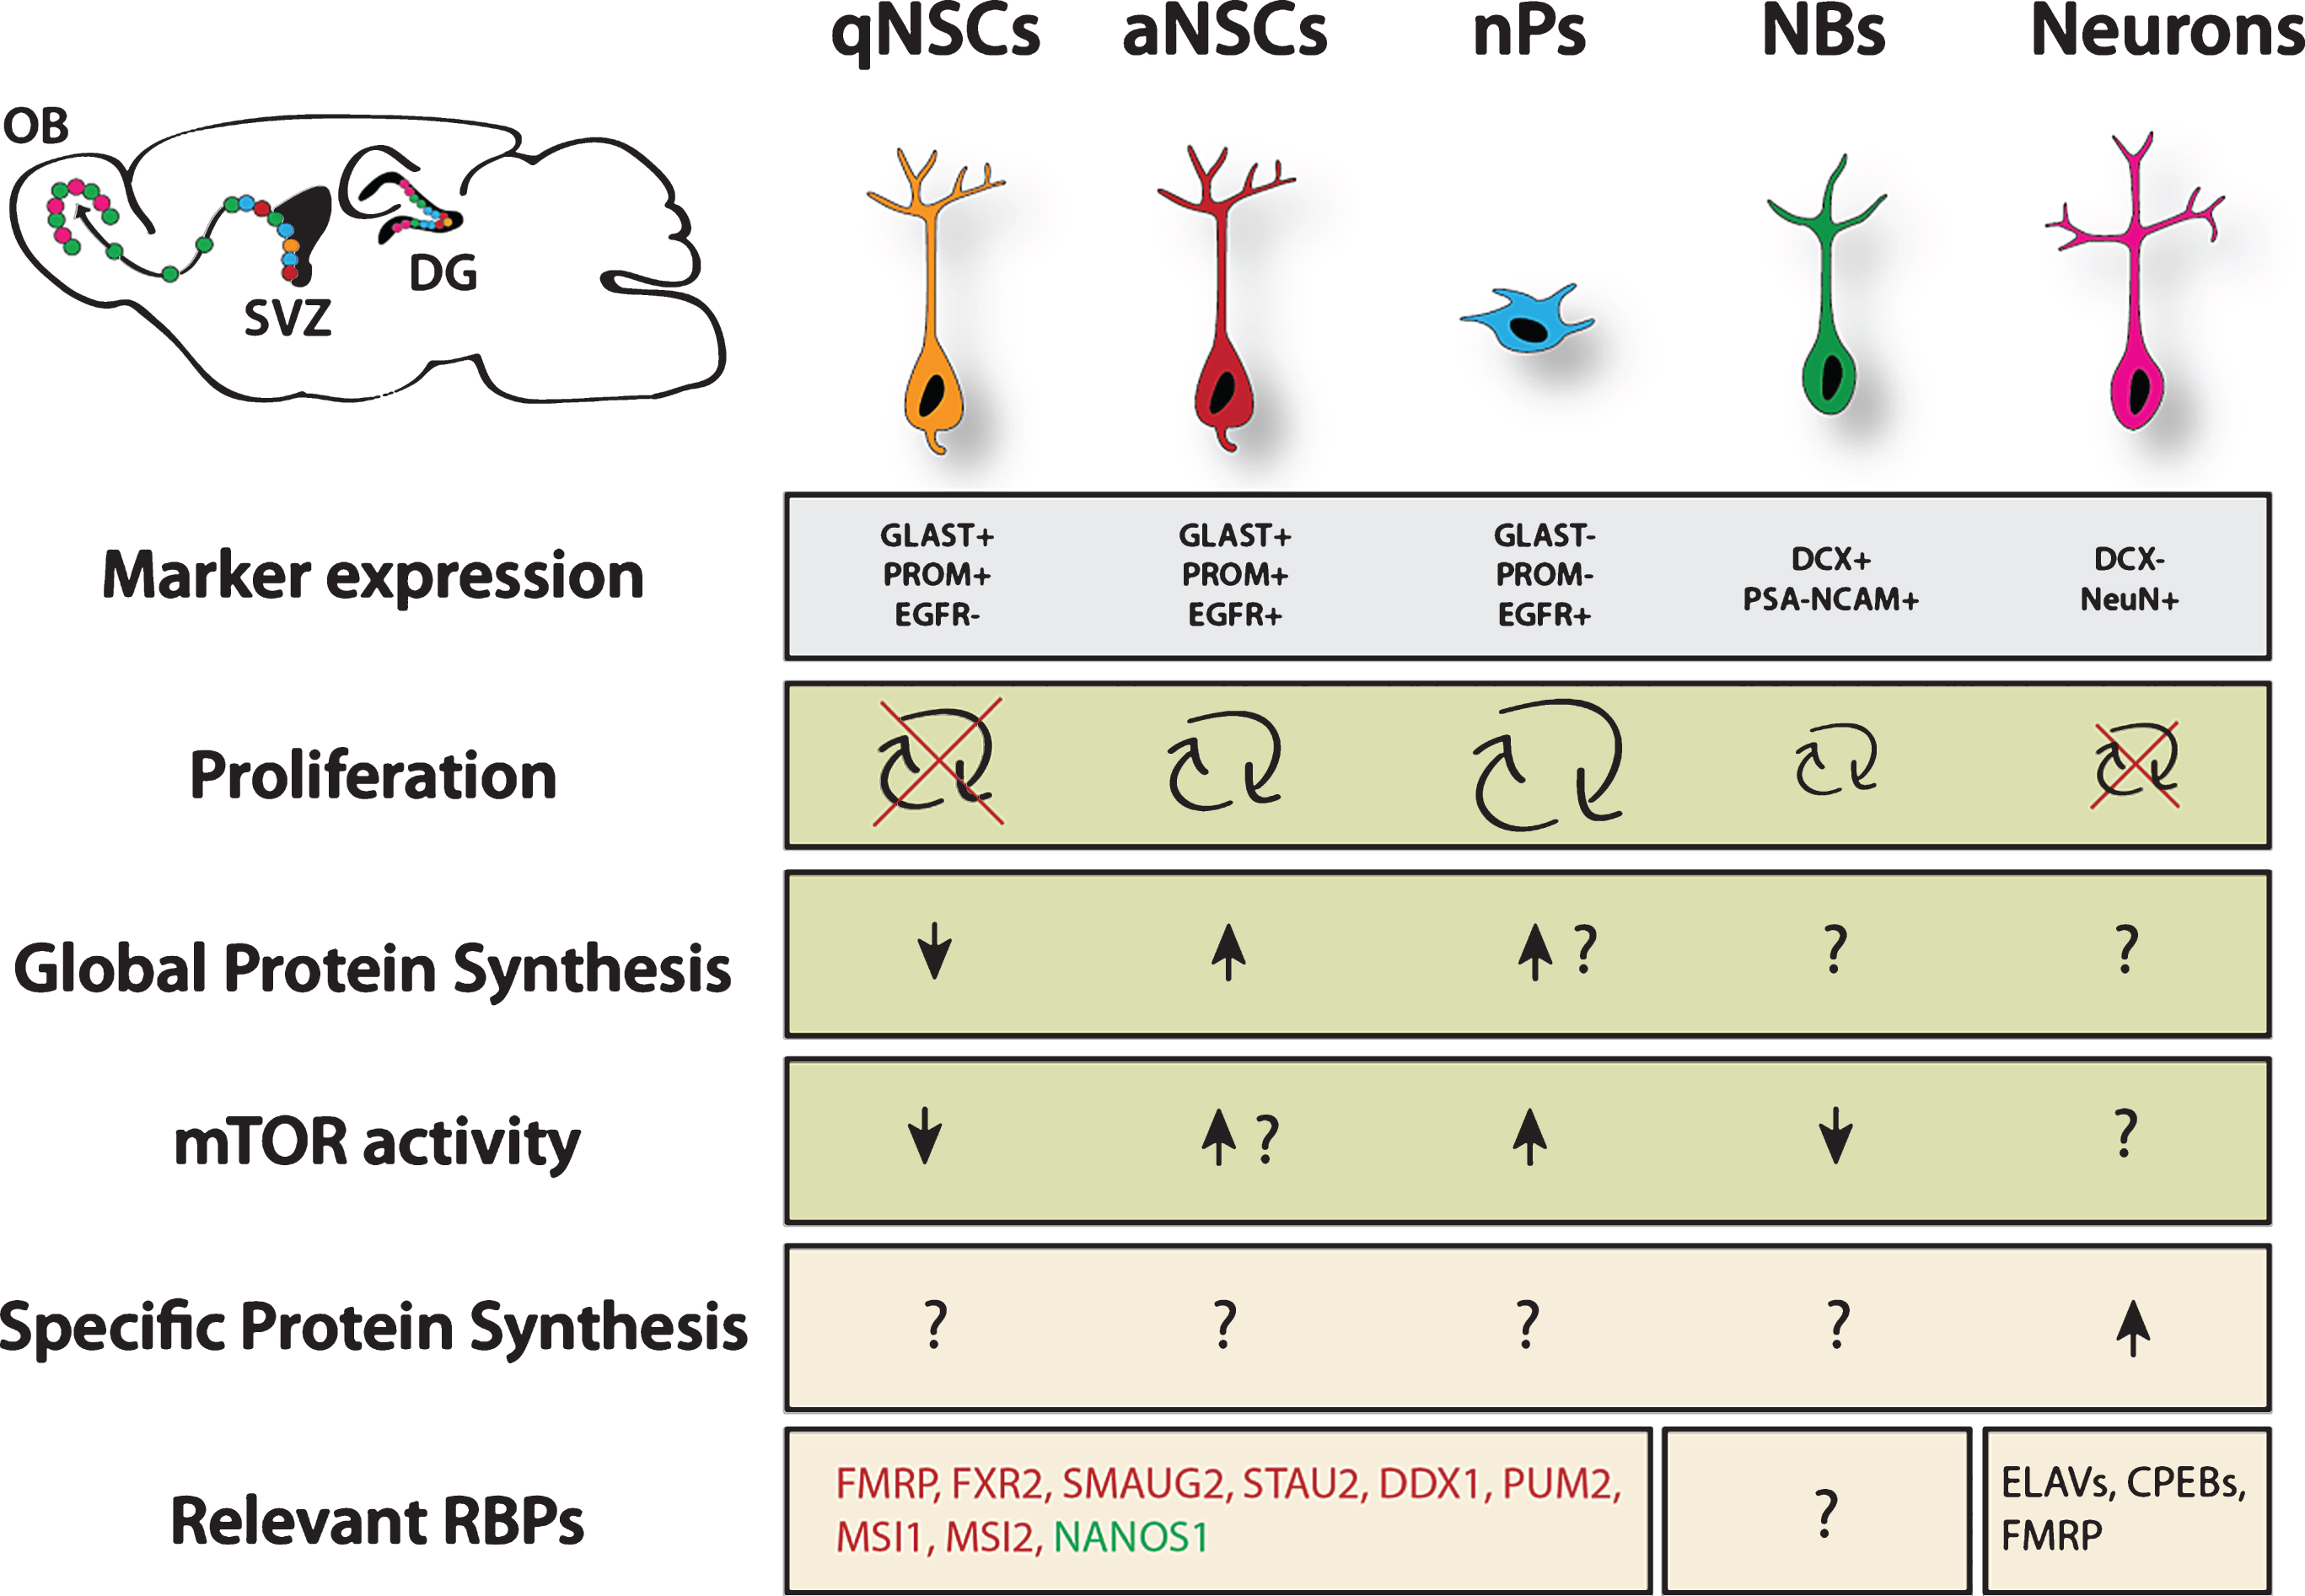 Overview of translational regulation taking place in the NSC lineage. Data was pooled from studies investigating cortical development, adult neurogenesis in the ventricular zone and hippocampus. Arrows represent relative estimation compared to other stages within the lineage. Question marks indicate unknown situation. Question marks next to arrows indicate likely scenario based on proliferation rate, however this is not experimentally proven. Green color marks proneurogenic factors, red color marks anti-neurogenic factors. qNSC = quiescent NSC, aNSC = active NSC, nP = neurogenic progenitor, NB = neuroblast. Major sources: Proliferation rates from Codega et al. (2014), neurons are known to be postmitotic. Marker expression and protein synthesis levels from Llorens-Bobadilla et al. (2015). mTOR activity from Paliouras et al. (2012). For more details, see the main text.